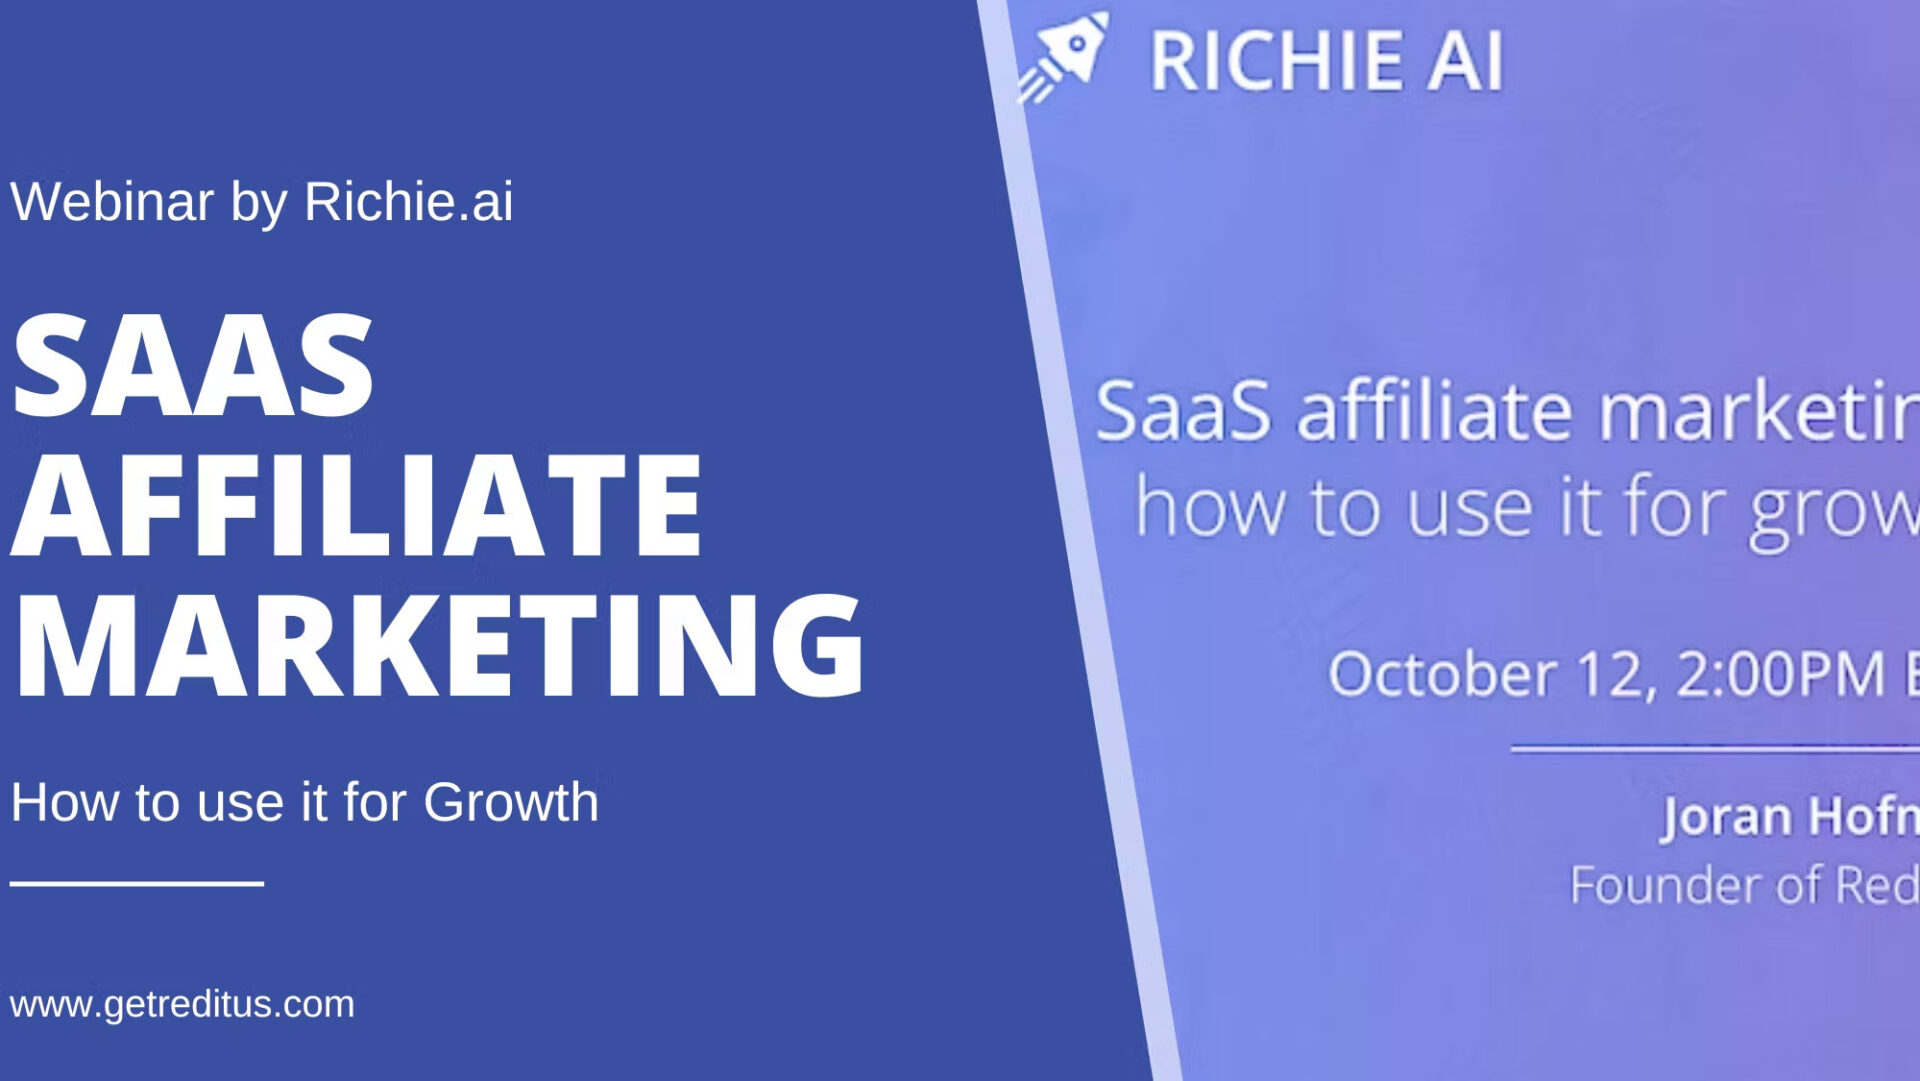 SaaS Affiliate Marketing: how to use it for growth